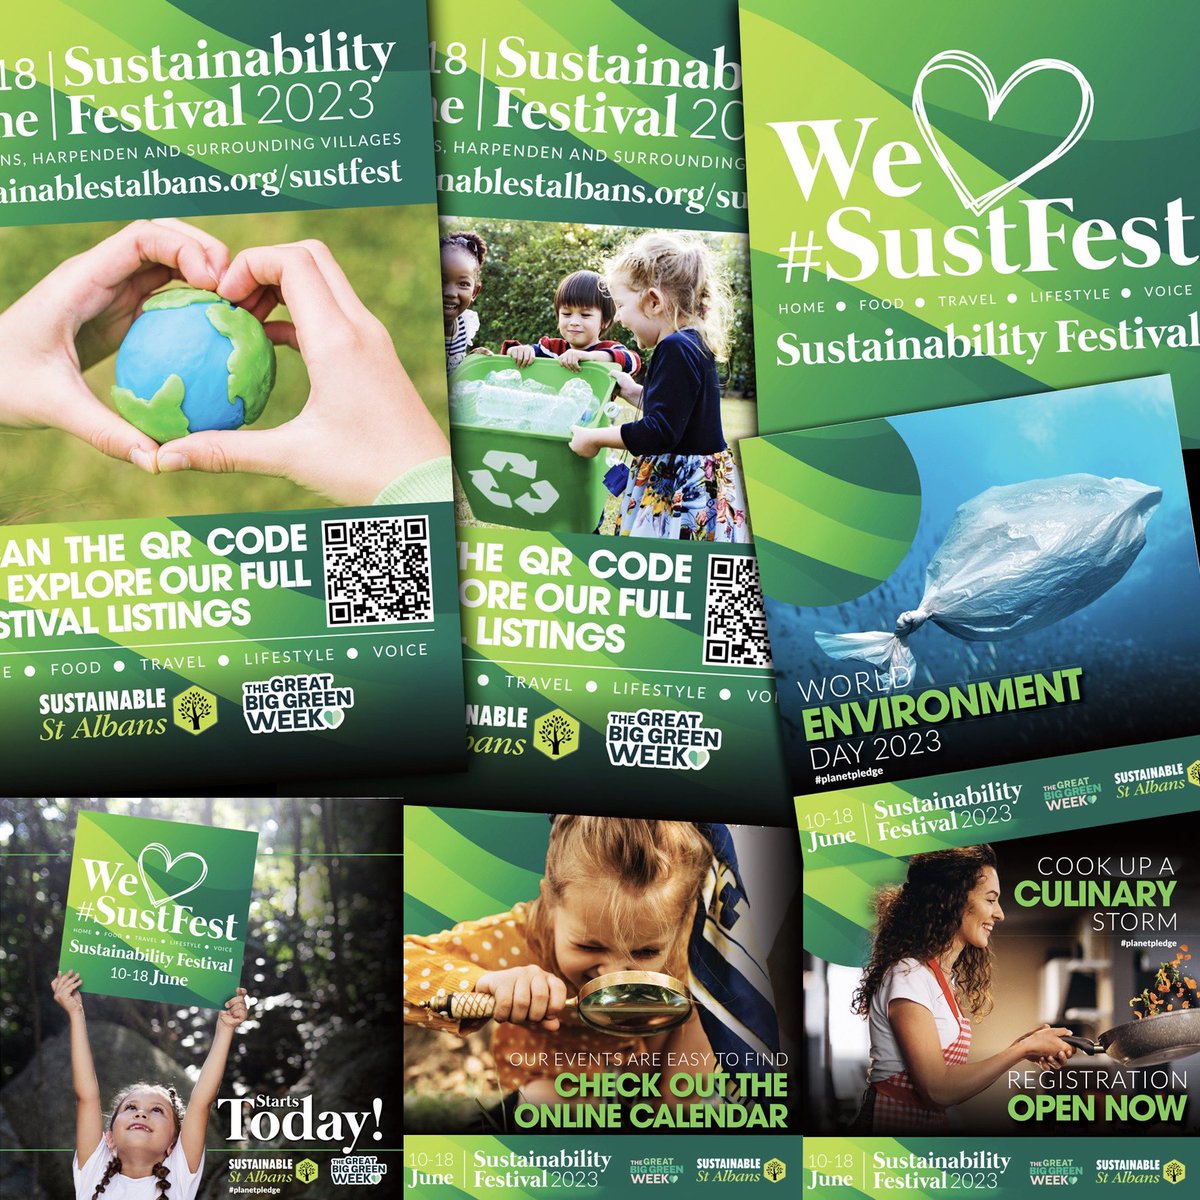 We’re extremely proud of our work for #SustFest and last month we helped develop the new brand along with social graphics, large print items (Bus Stop posters/banners) and lots more Thank you for the wonderful comments about the new look and we’re already looking forward to 2024